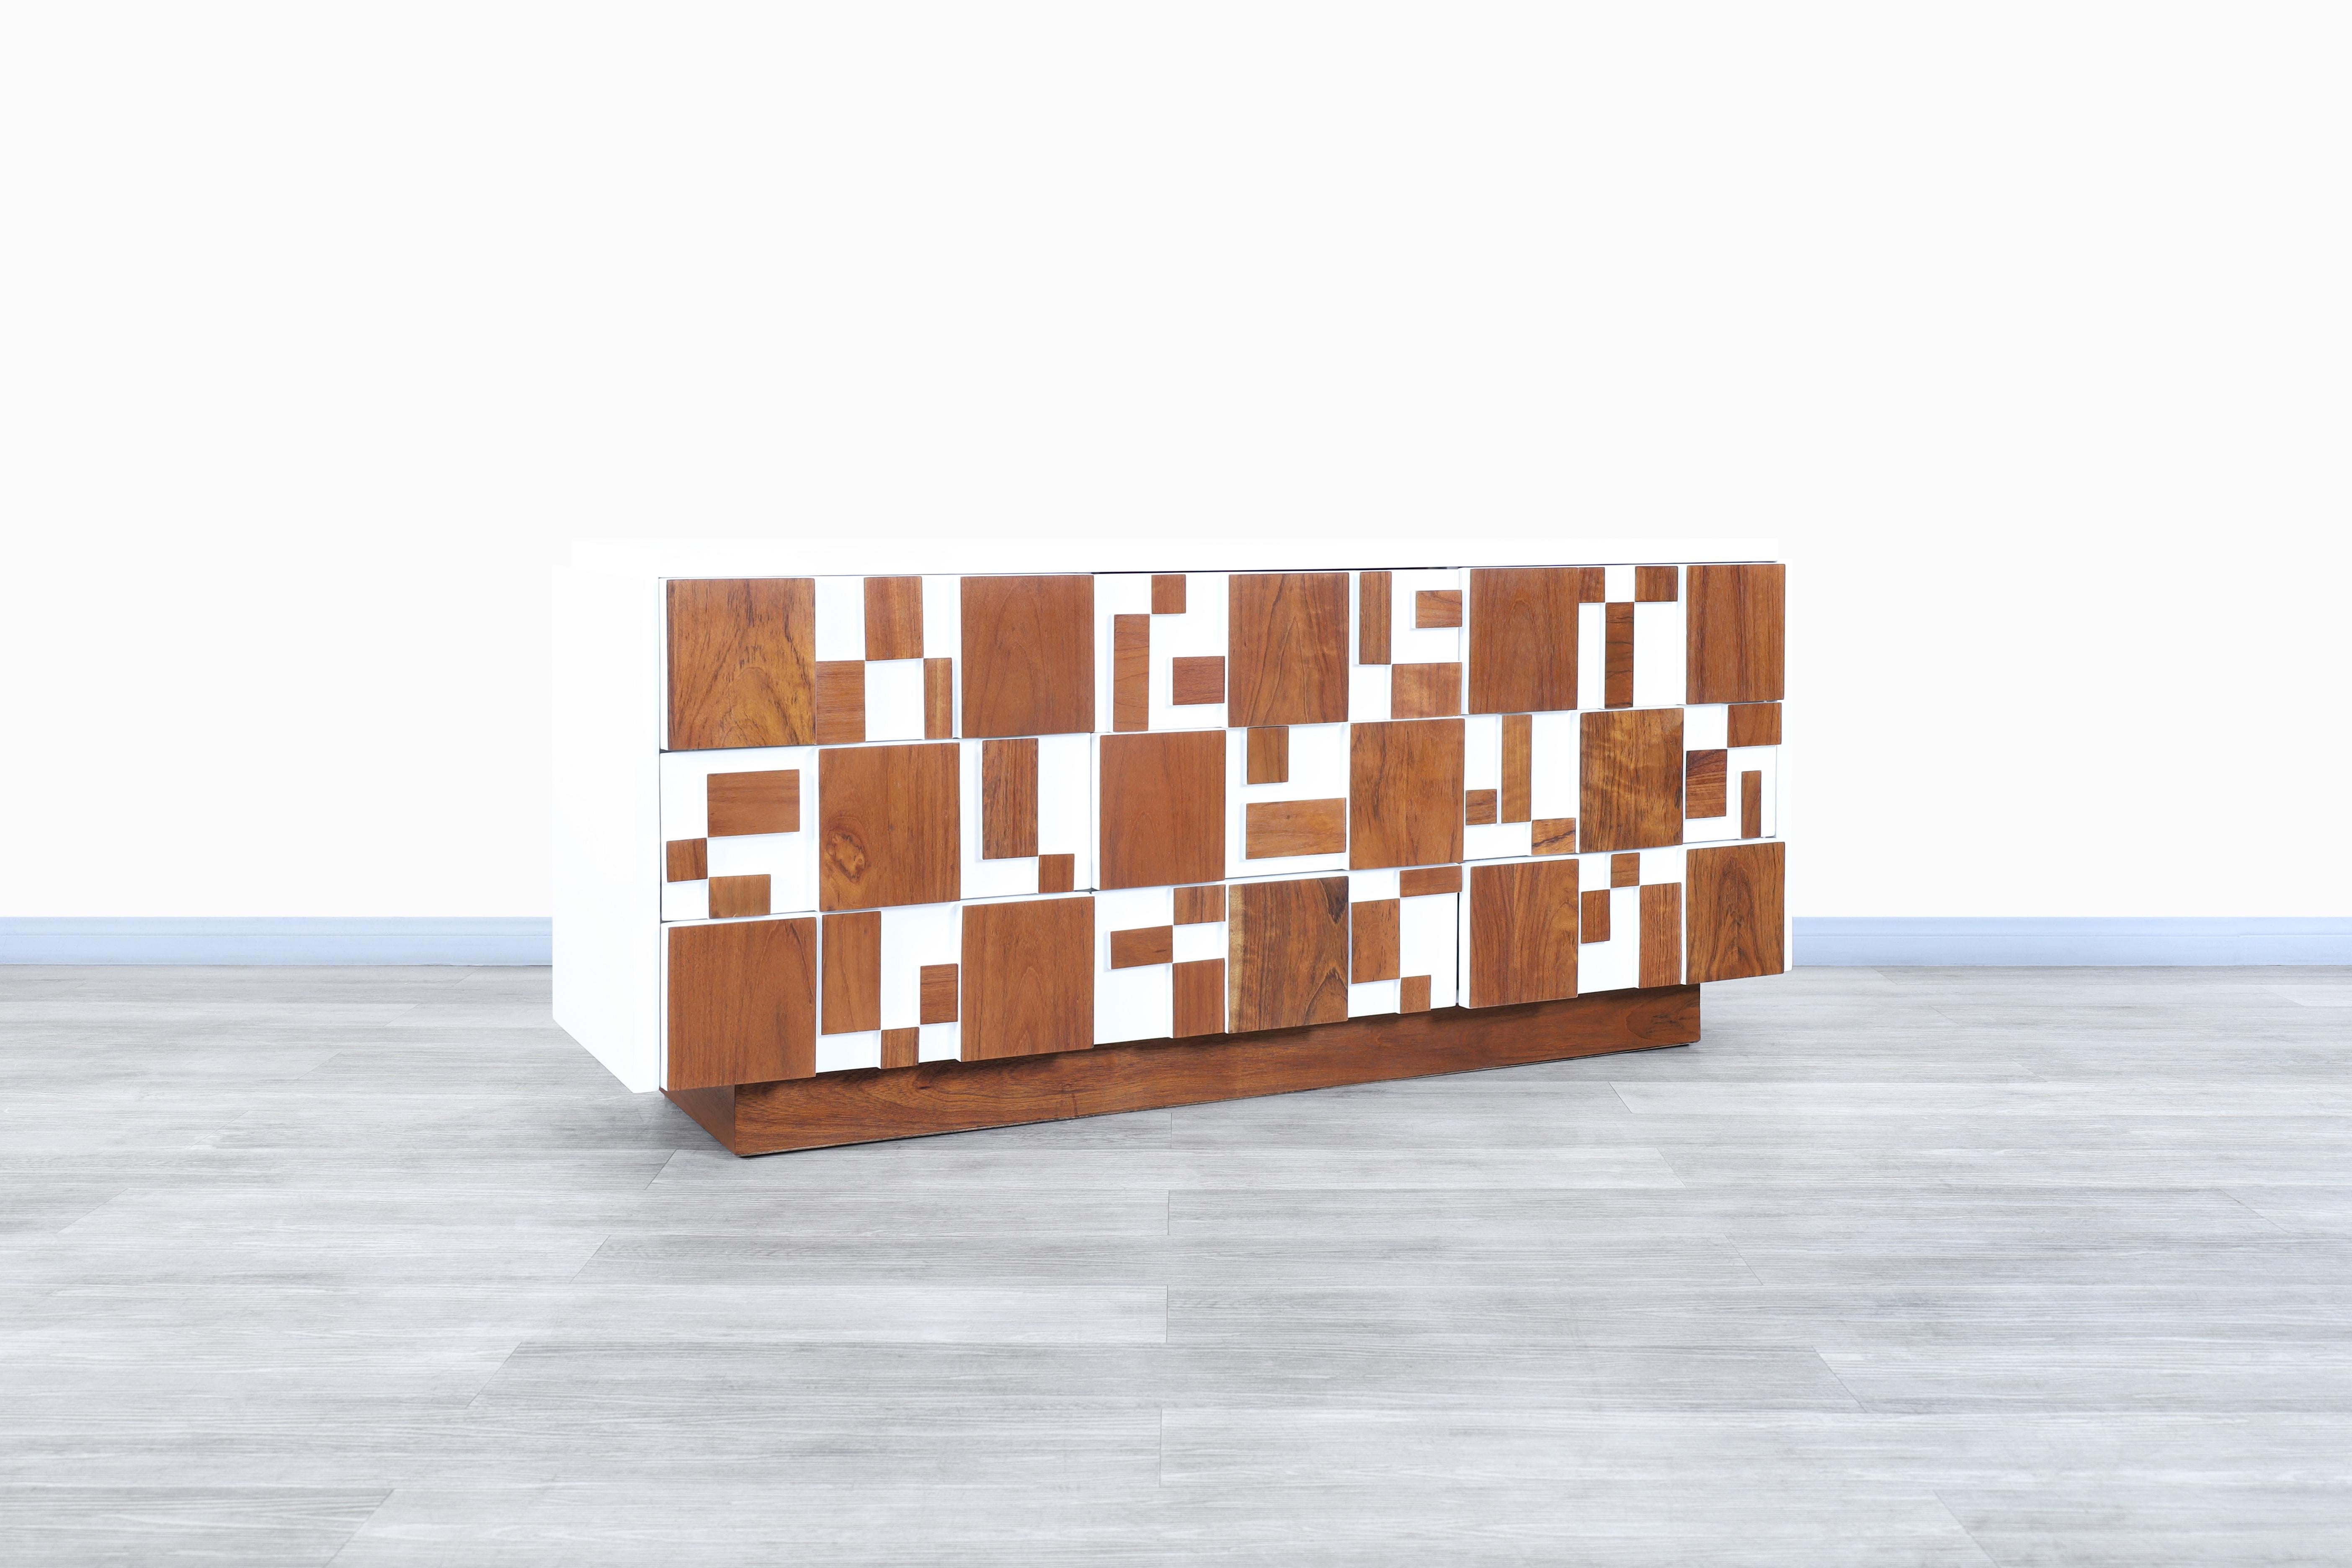 Amazing vintage brutalist walnut mosaic credenza manufactured by Lane in the United States, circa 1960s. This dresser features nine dovetail drawers, all integrated with geometric shapes on the front side. Its versatility allows it to serve as a